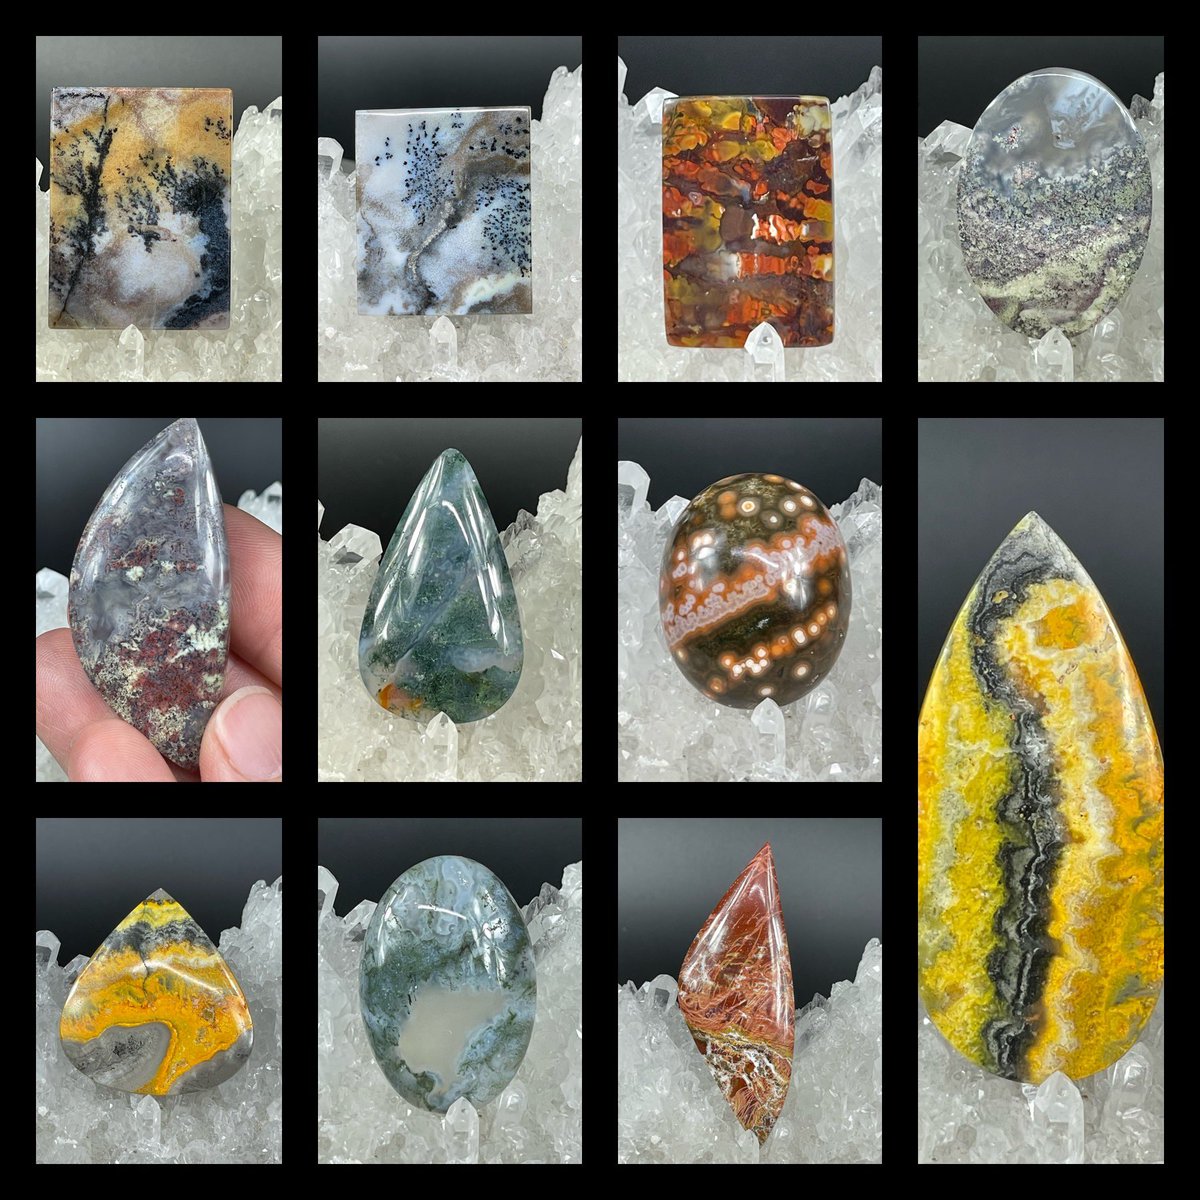 Some of the Indonesian cabochons we have available now. More to be added soon 😊 
oldearthminerals.com
#cabochons #jewelrymaking #naturalcabochons #jewelrysupplies #cabochon #cabochonsforsale